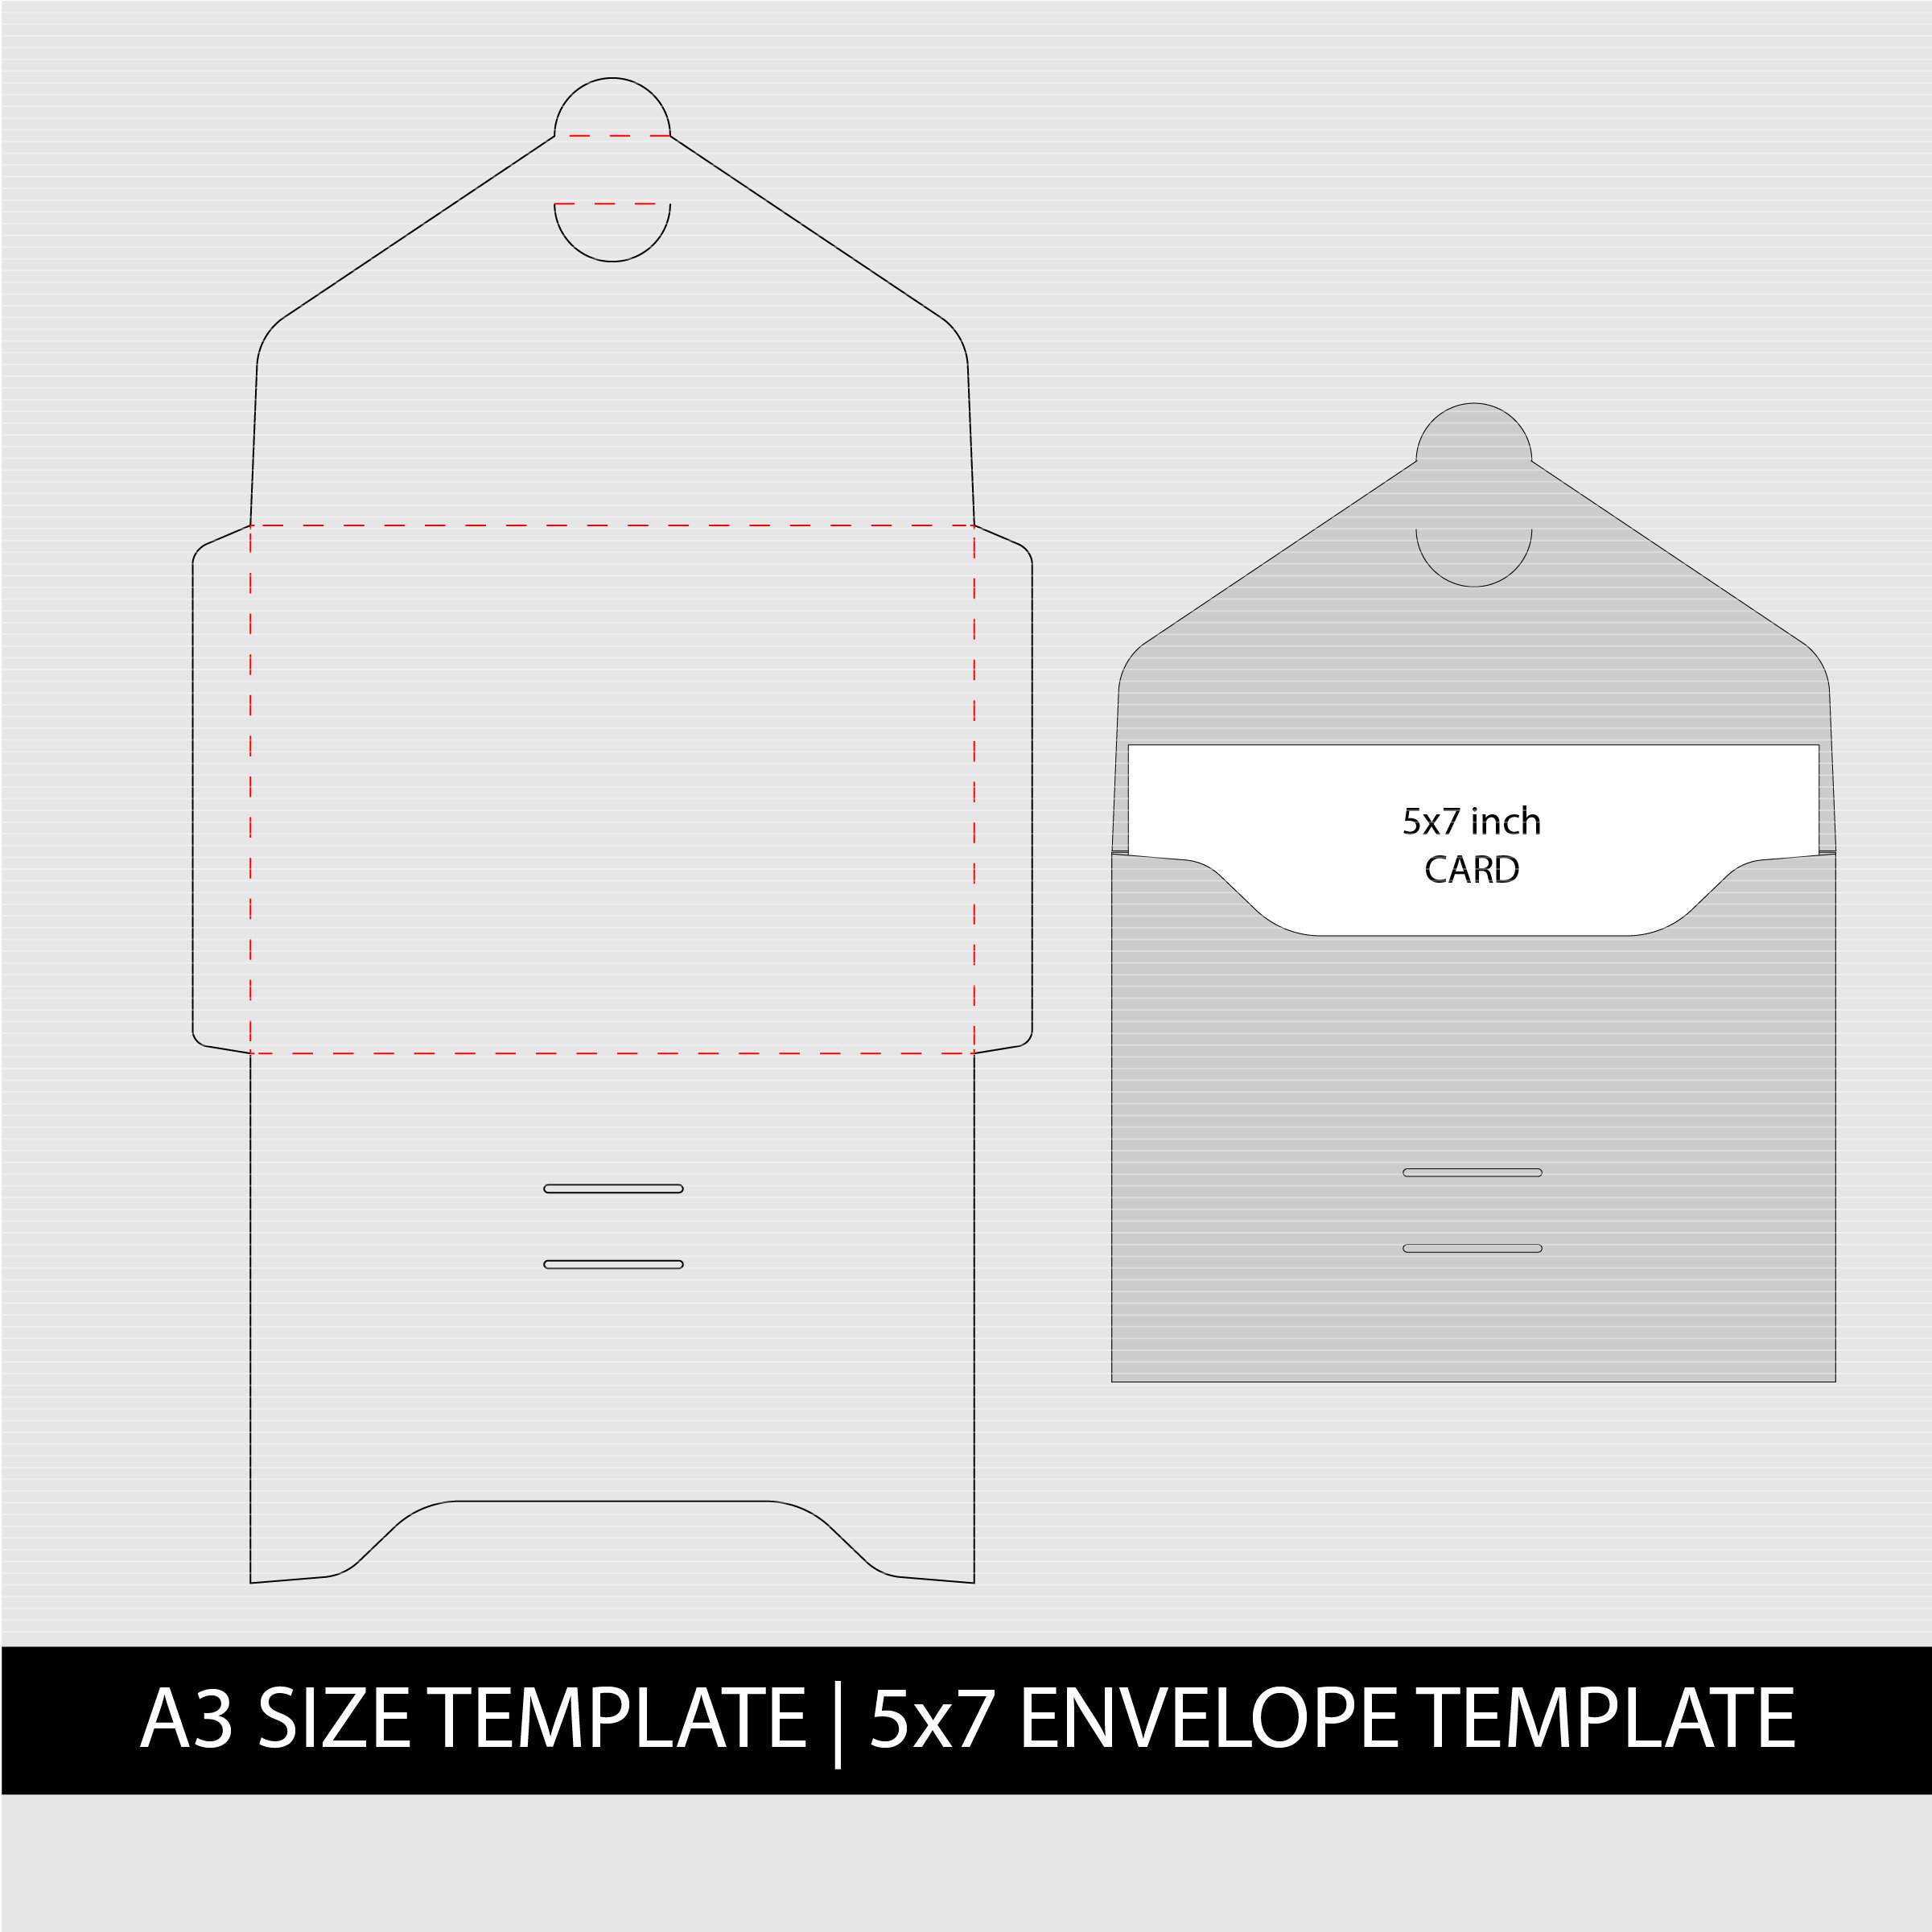 Envelope Template for 5x7,PNG and SVG, Dxf, Formats, A3 sheet, Printable